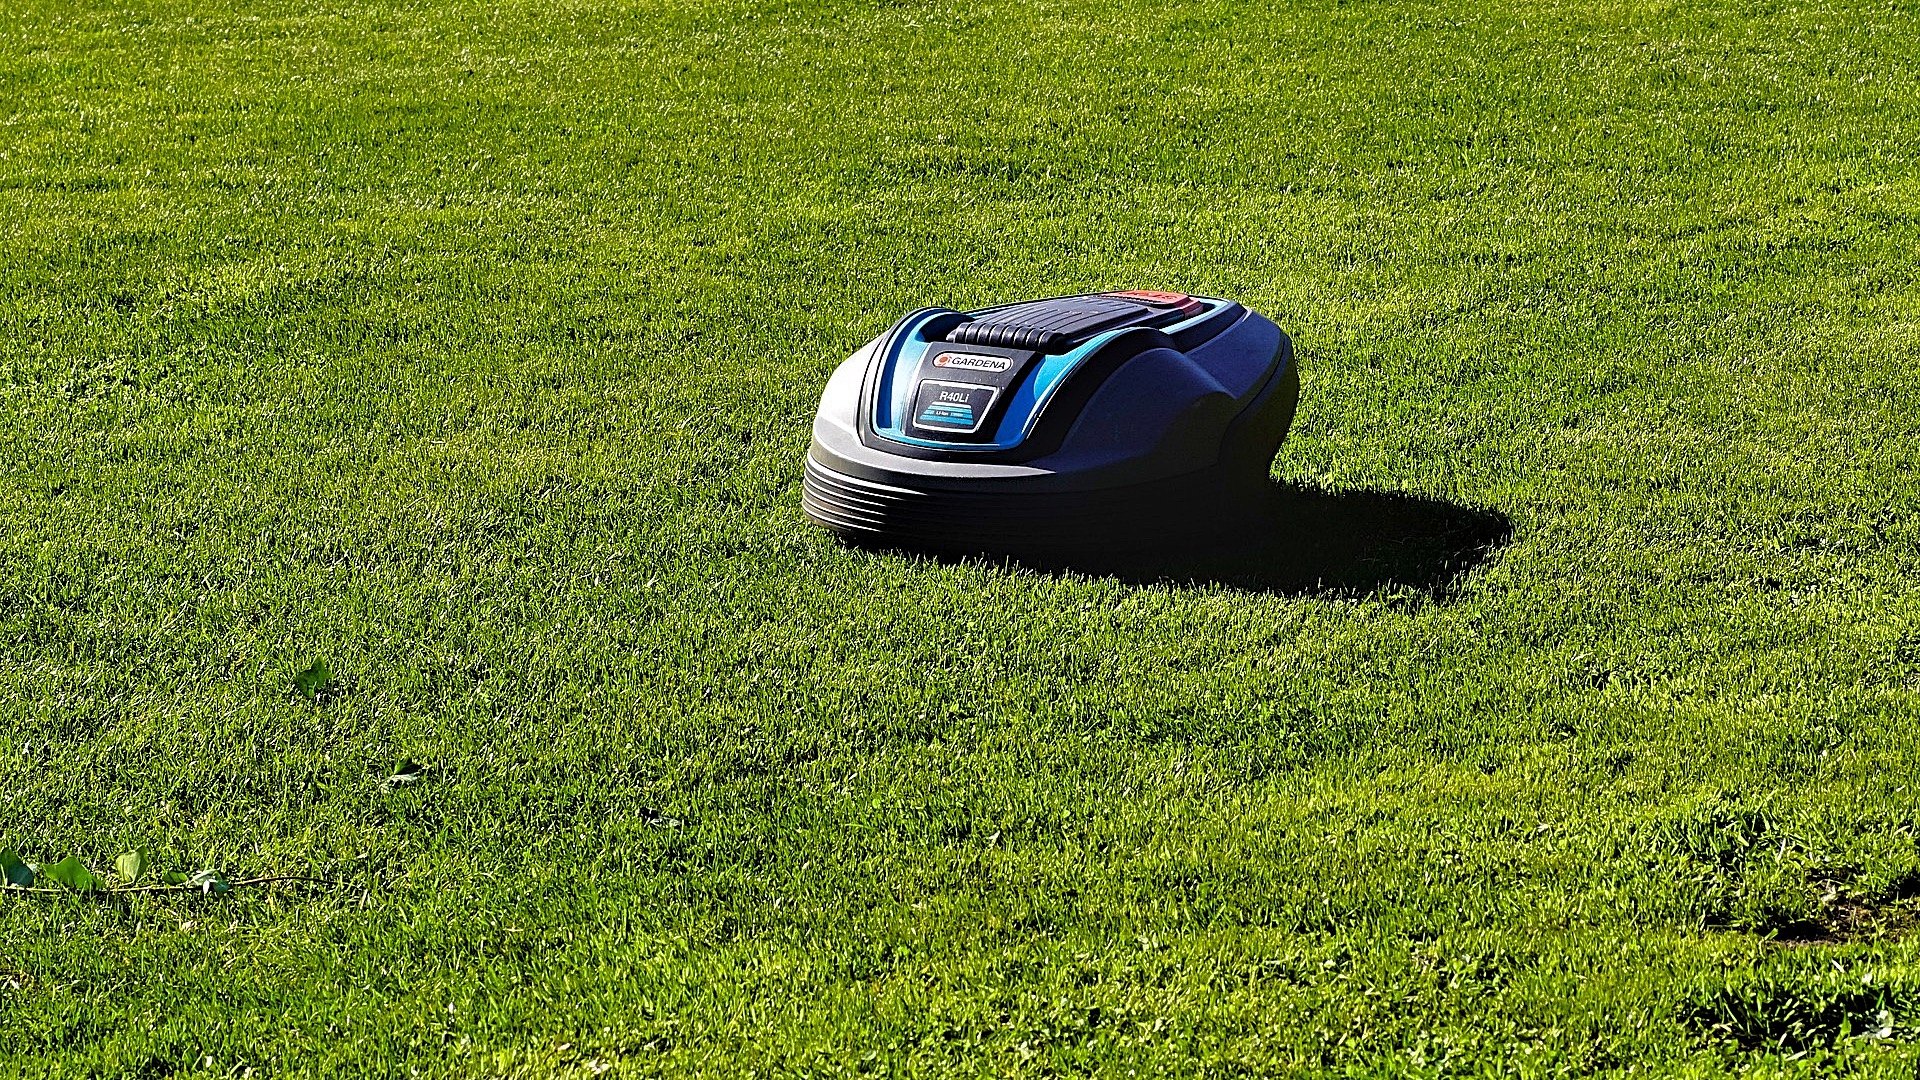 use-a-robot-mower-to-mow-new-sod-installation